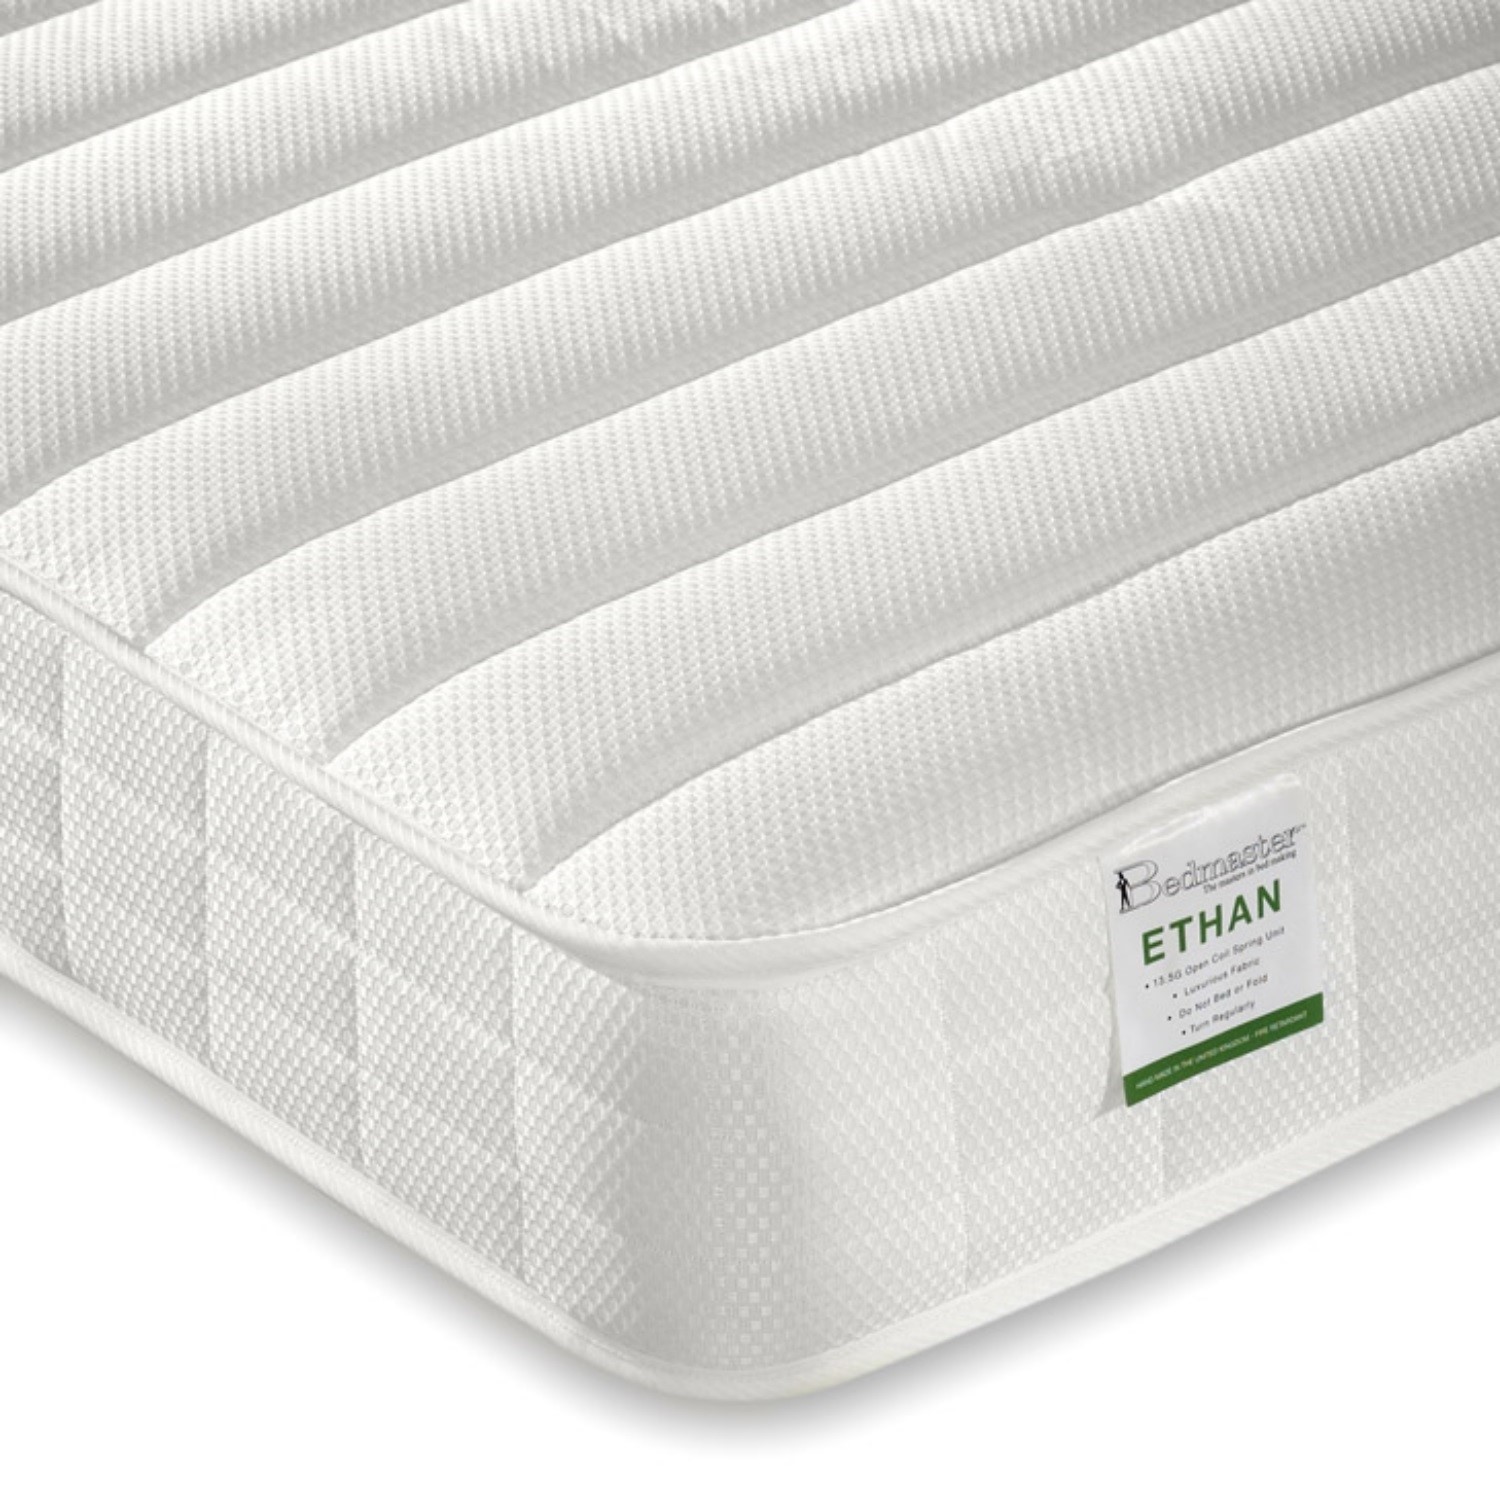 Ethan quilted open coil spring mattress - single